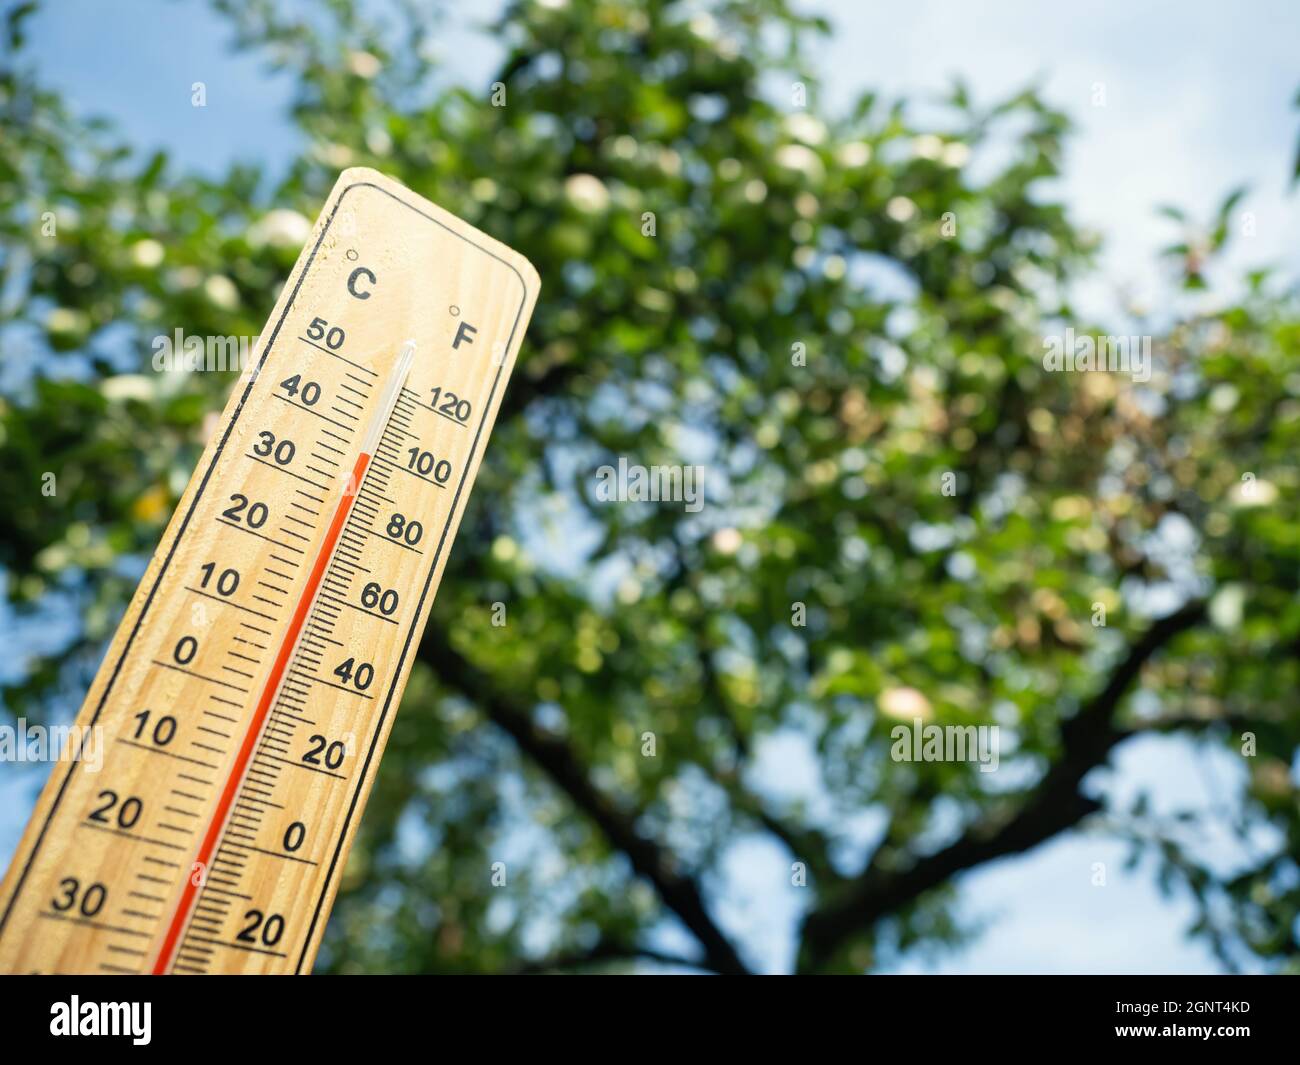 https://c8.alamy.com/comp/2GNT4KD/wooden-thermometer-with-red-measuring-liquid-showing-high-temperature-over-36-degrees-celsius-on-sunny-day-on-background-of-apple-tree-concept-of-hea-2GNT4KD.jpg